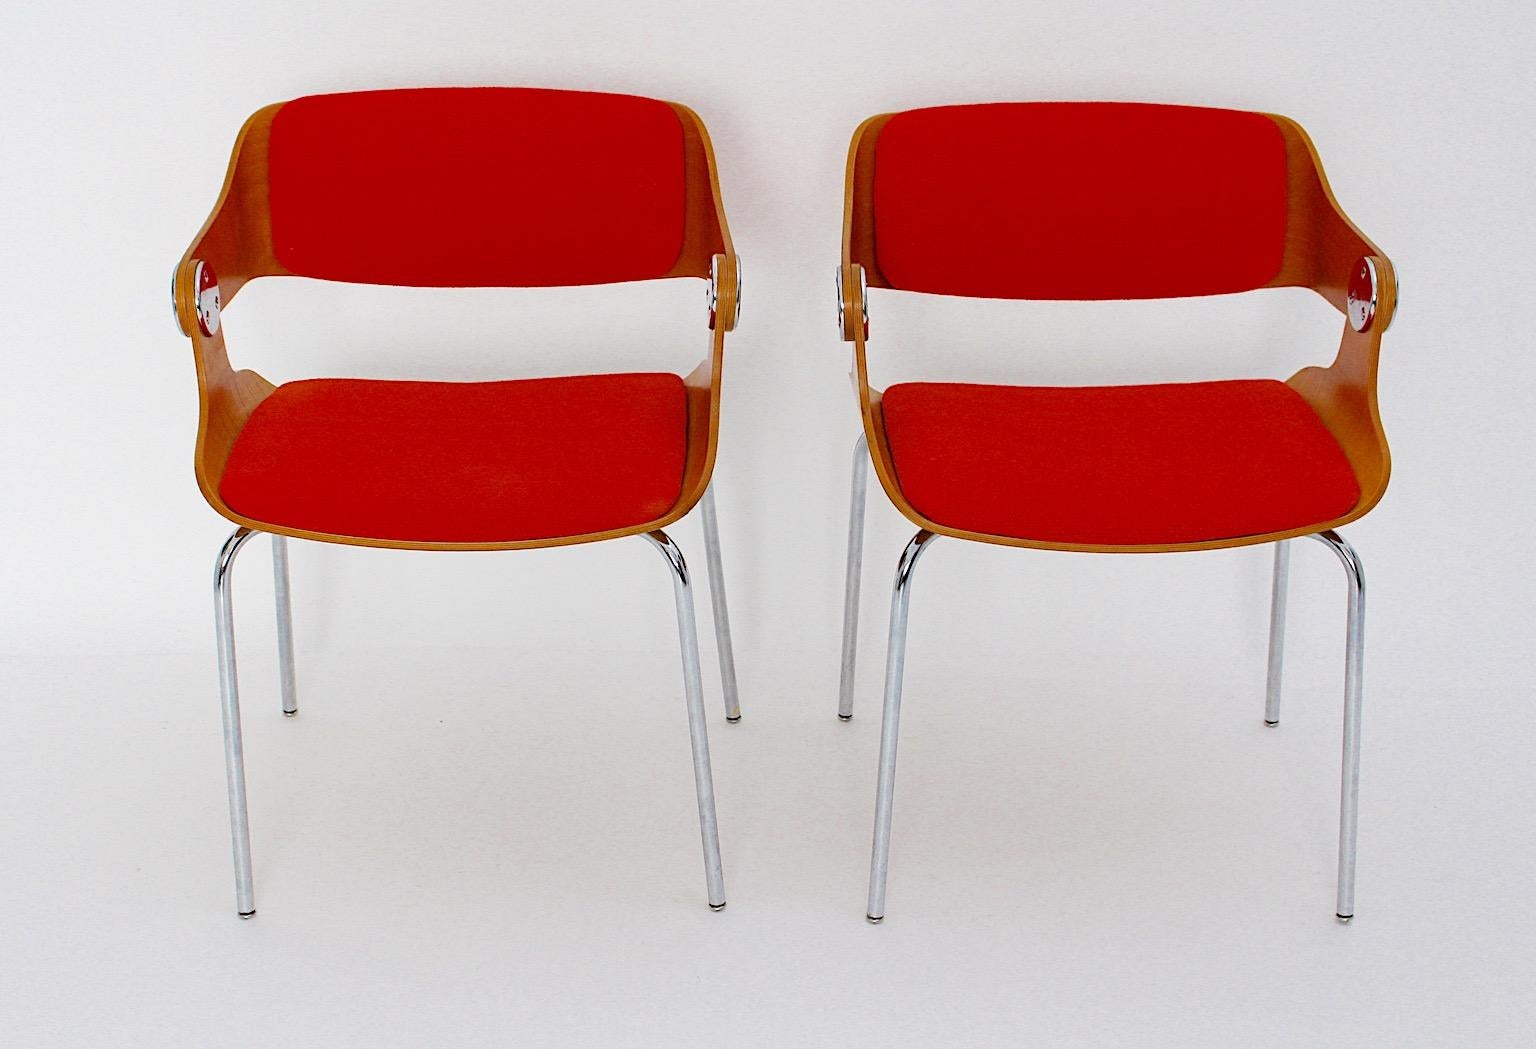 Mid Century Modern vintage dining chairs pair or duo from chromed metal, bentwood and upholstered seat and back from woolen textile fabric in orange color by Eugen Schmidt, circa 1965 Germany. 
A beautiful pair of dining chairs features a seat shell